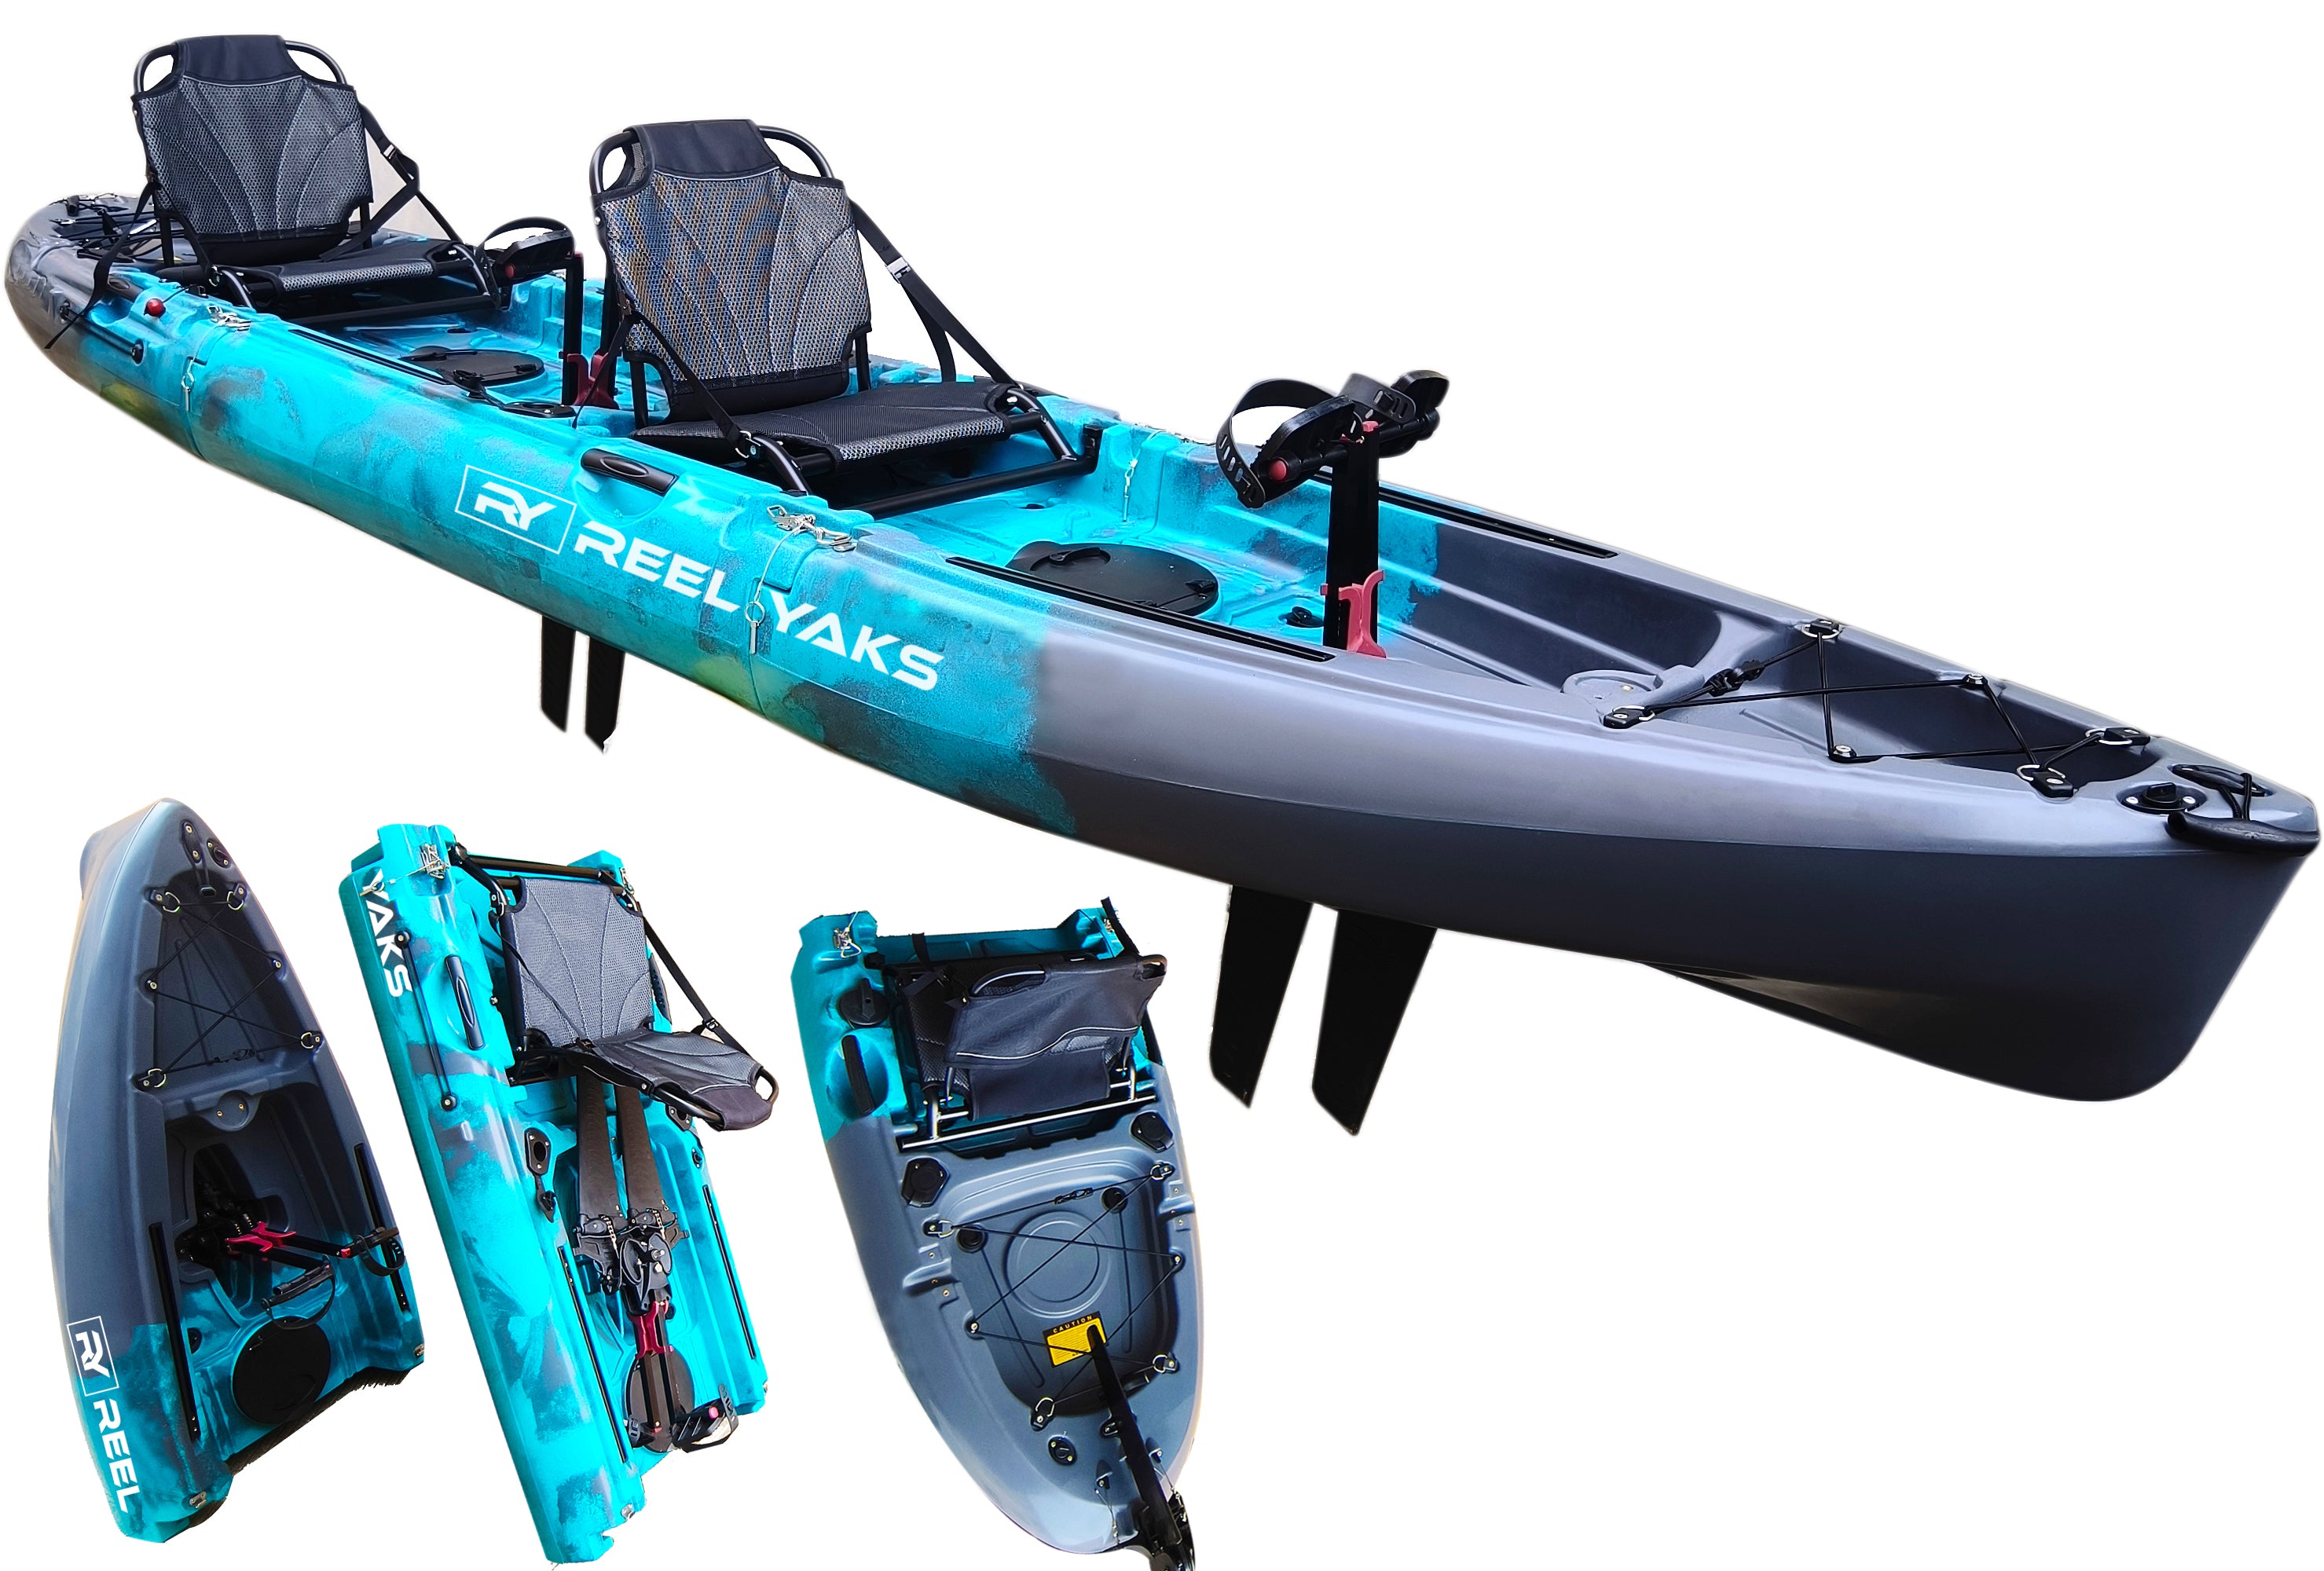 50% 0FF New Affordable Pedal Drive Kayak for a Limited Time - Meet